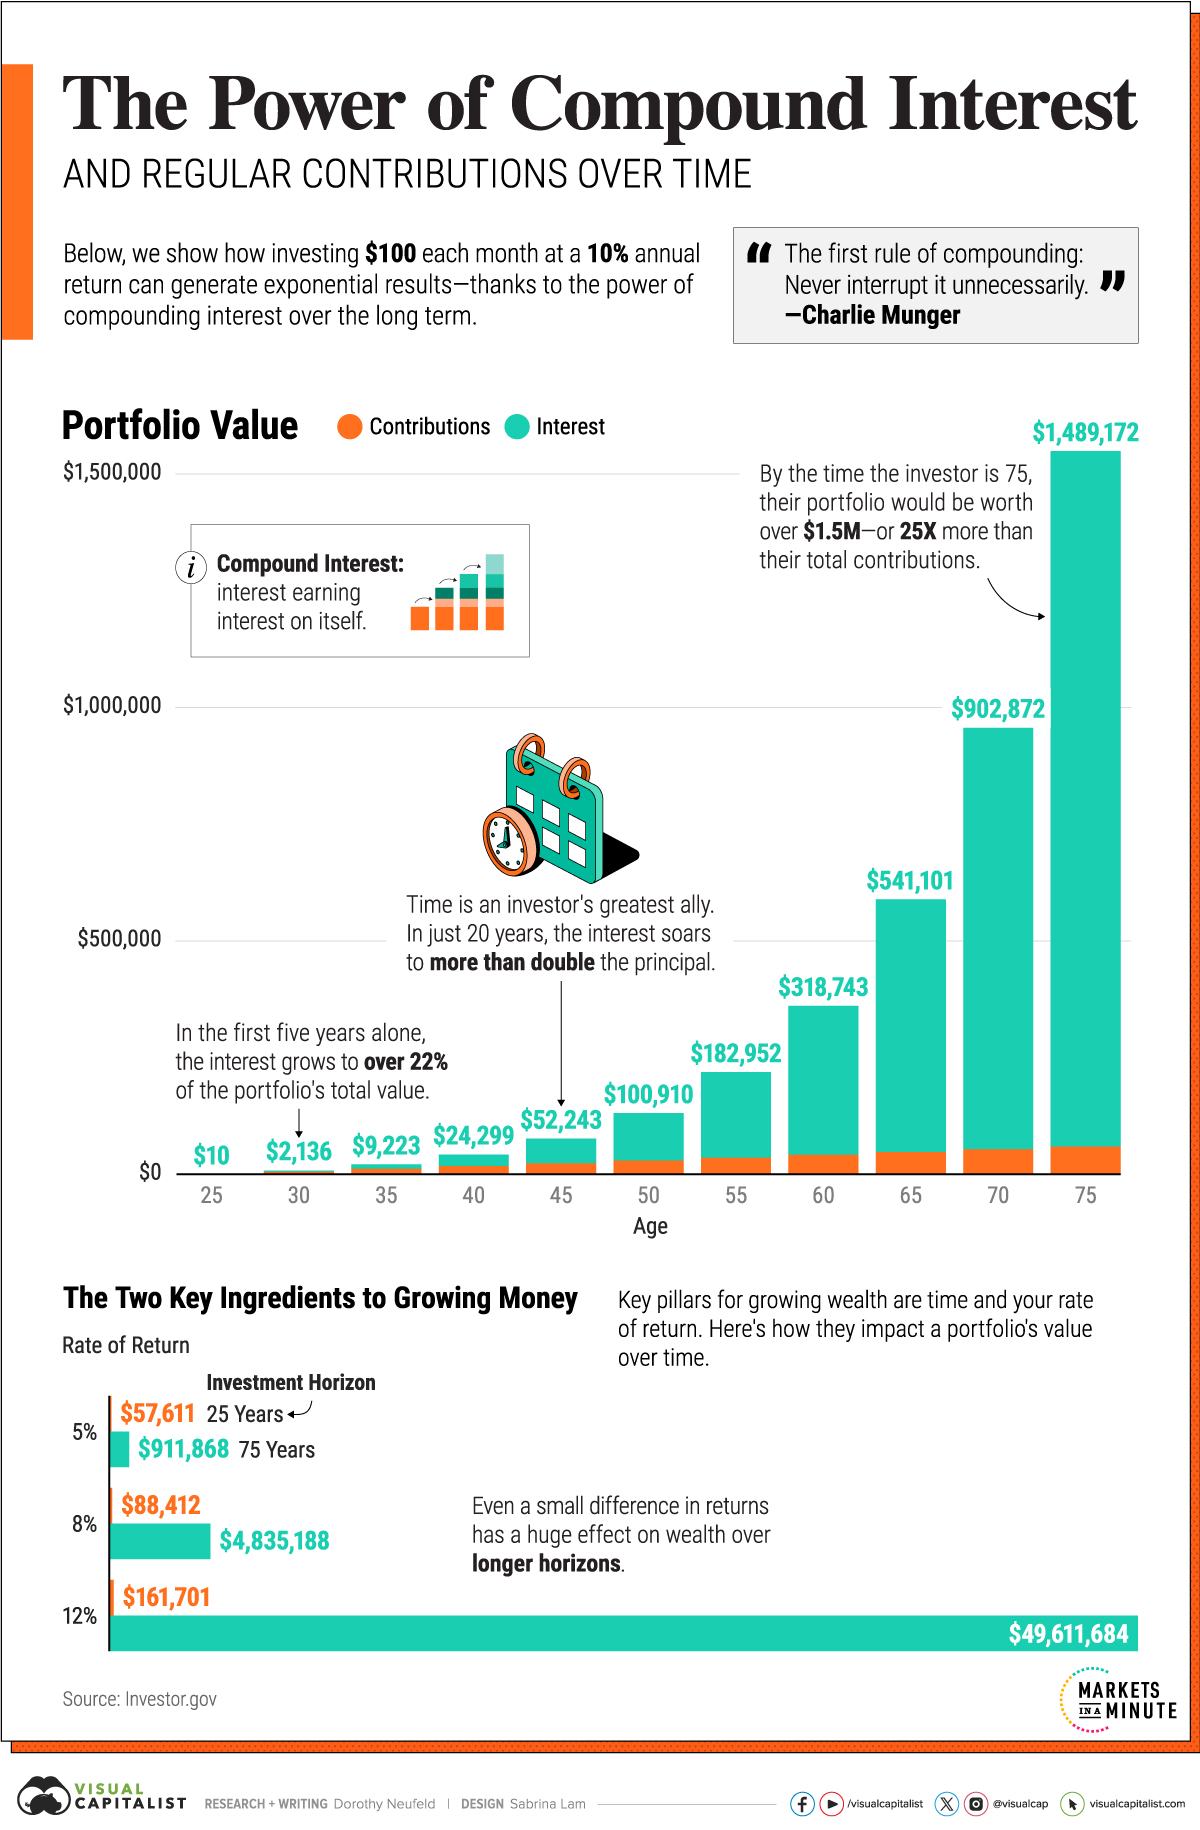 This bar chart shows the power of compound interest and regular contributions over time.